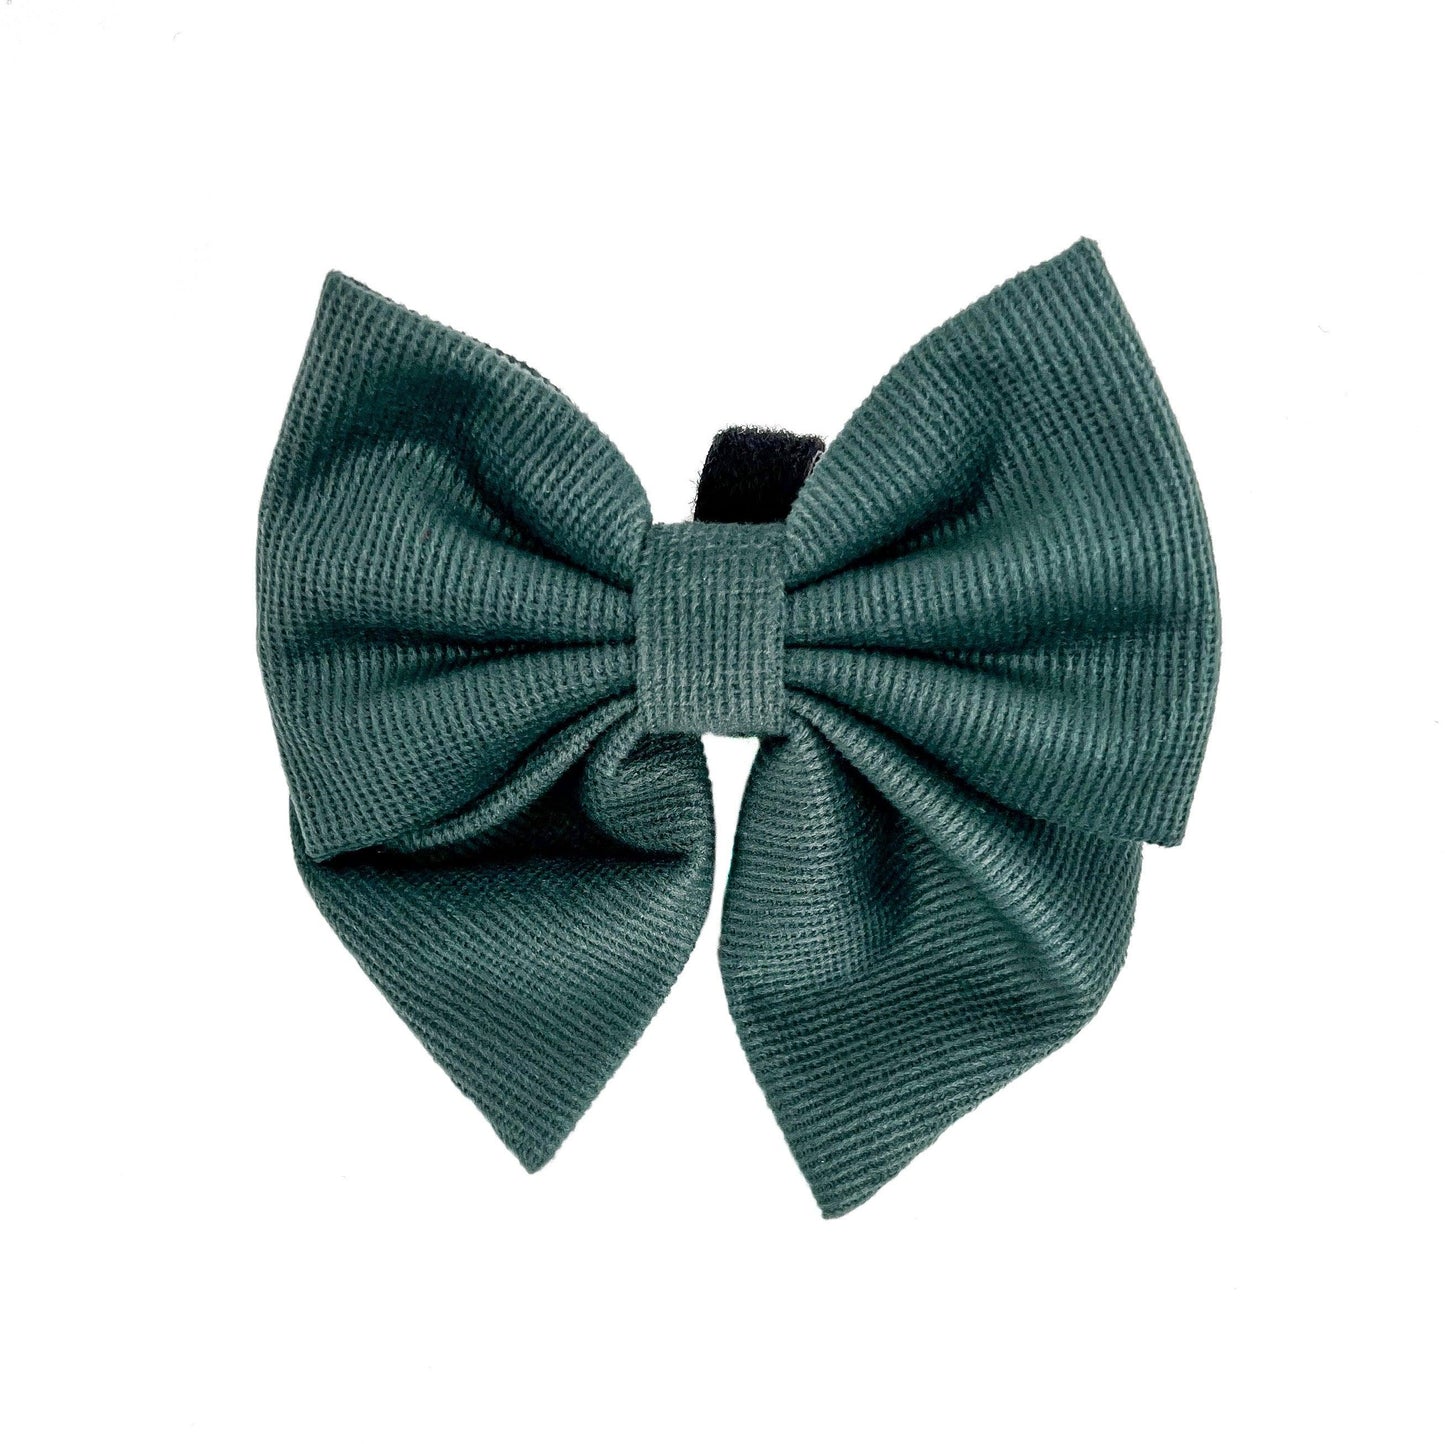 Shop Thick, Durable, and Easy-attach Corduroy Sailor Bow Tie Moss by Boogs & Boop